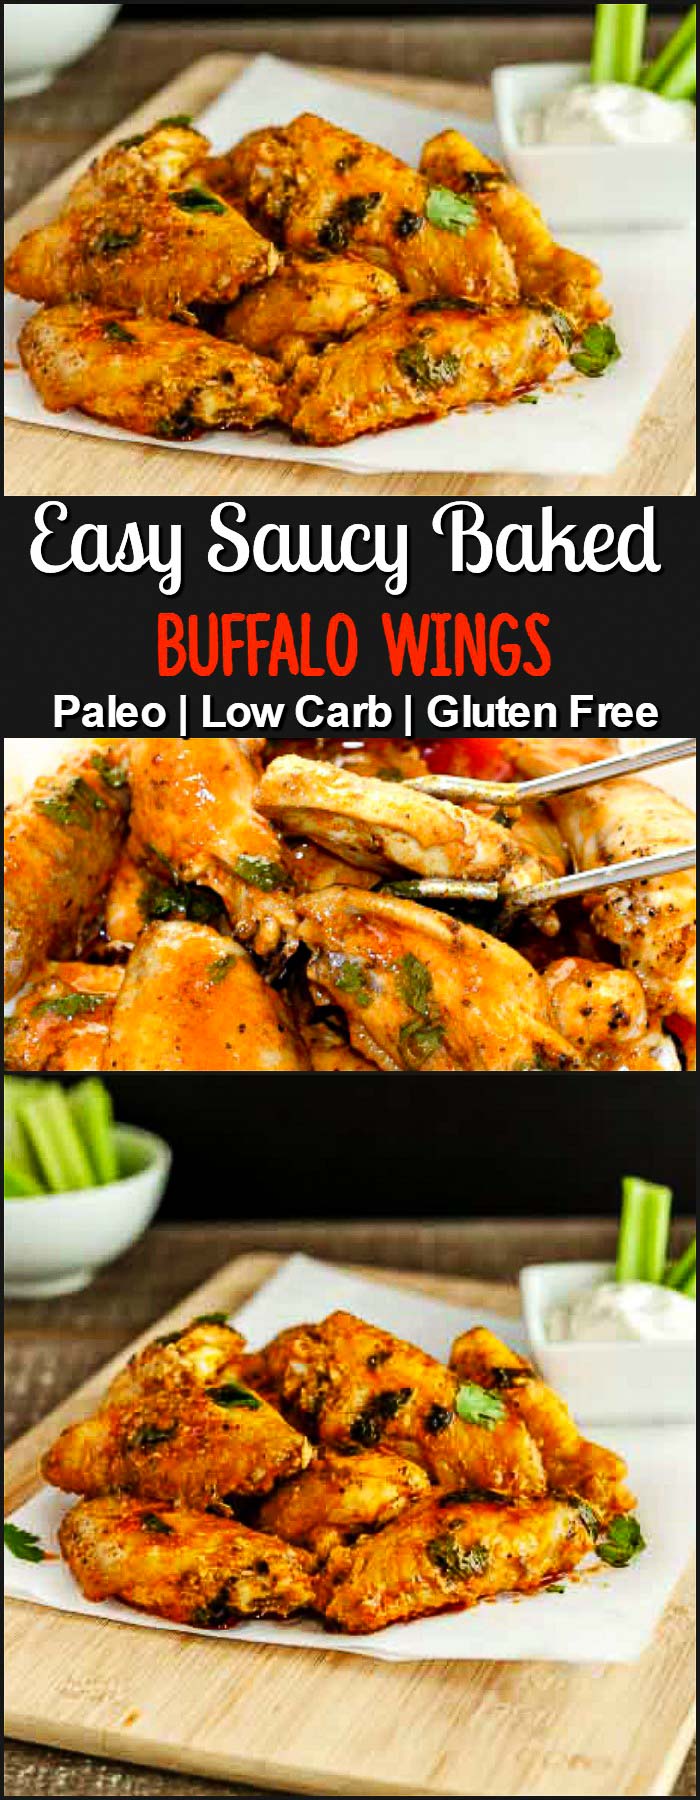 Saucy Baked Buffalo Chicken Wings, low carb, grain free, paleo